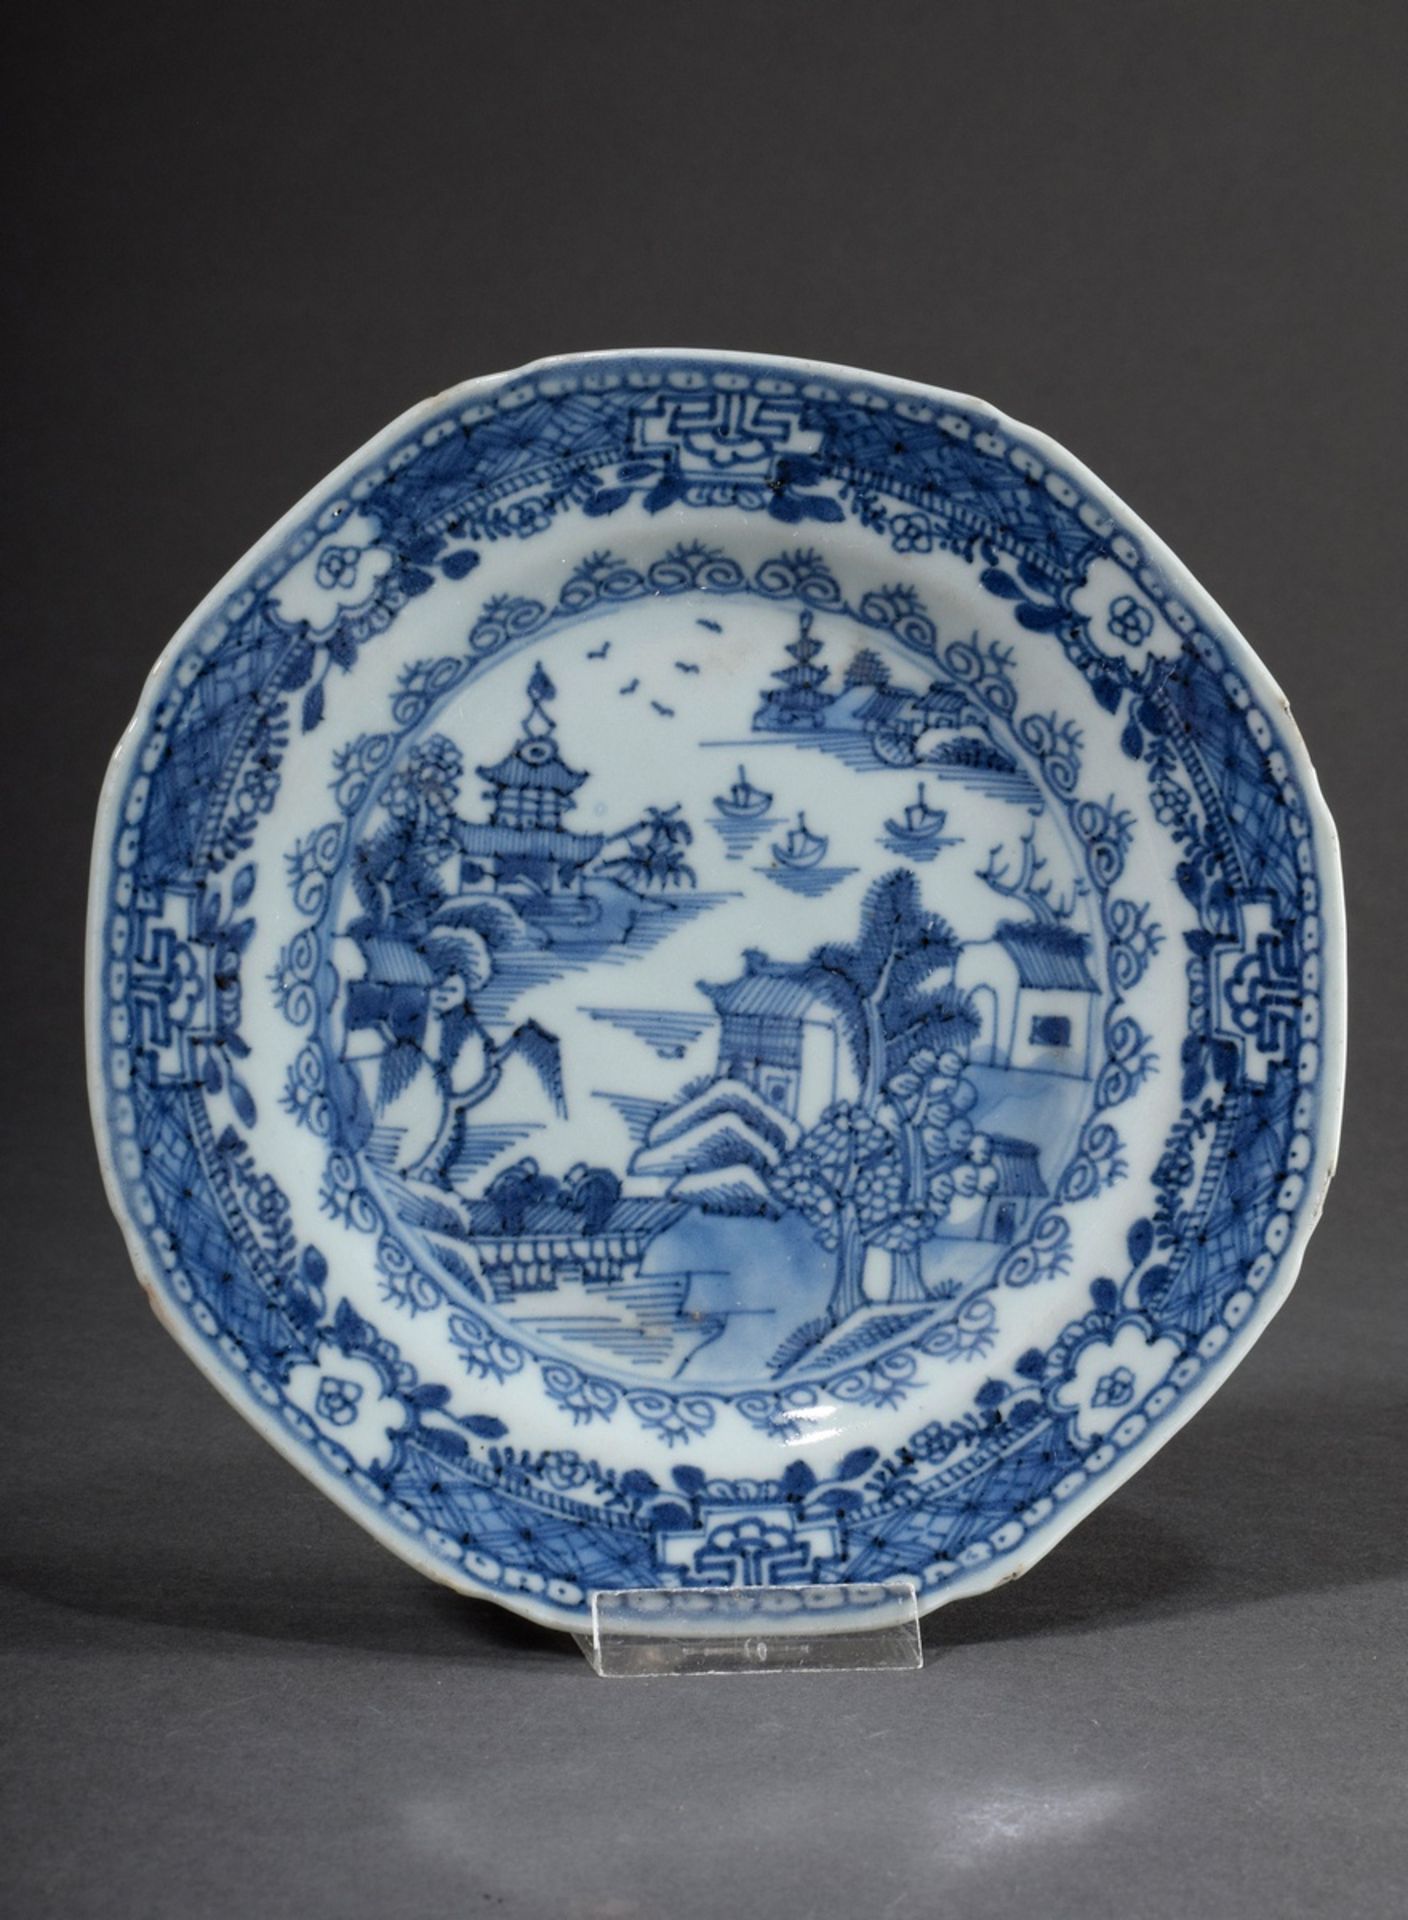 Small plate with blue painting decoration "Landscape with pagodas, boats and people", Qianlong peri